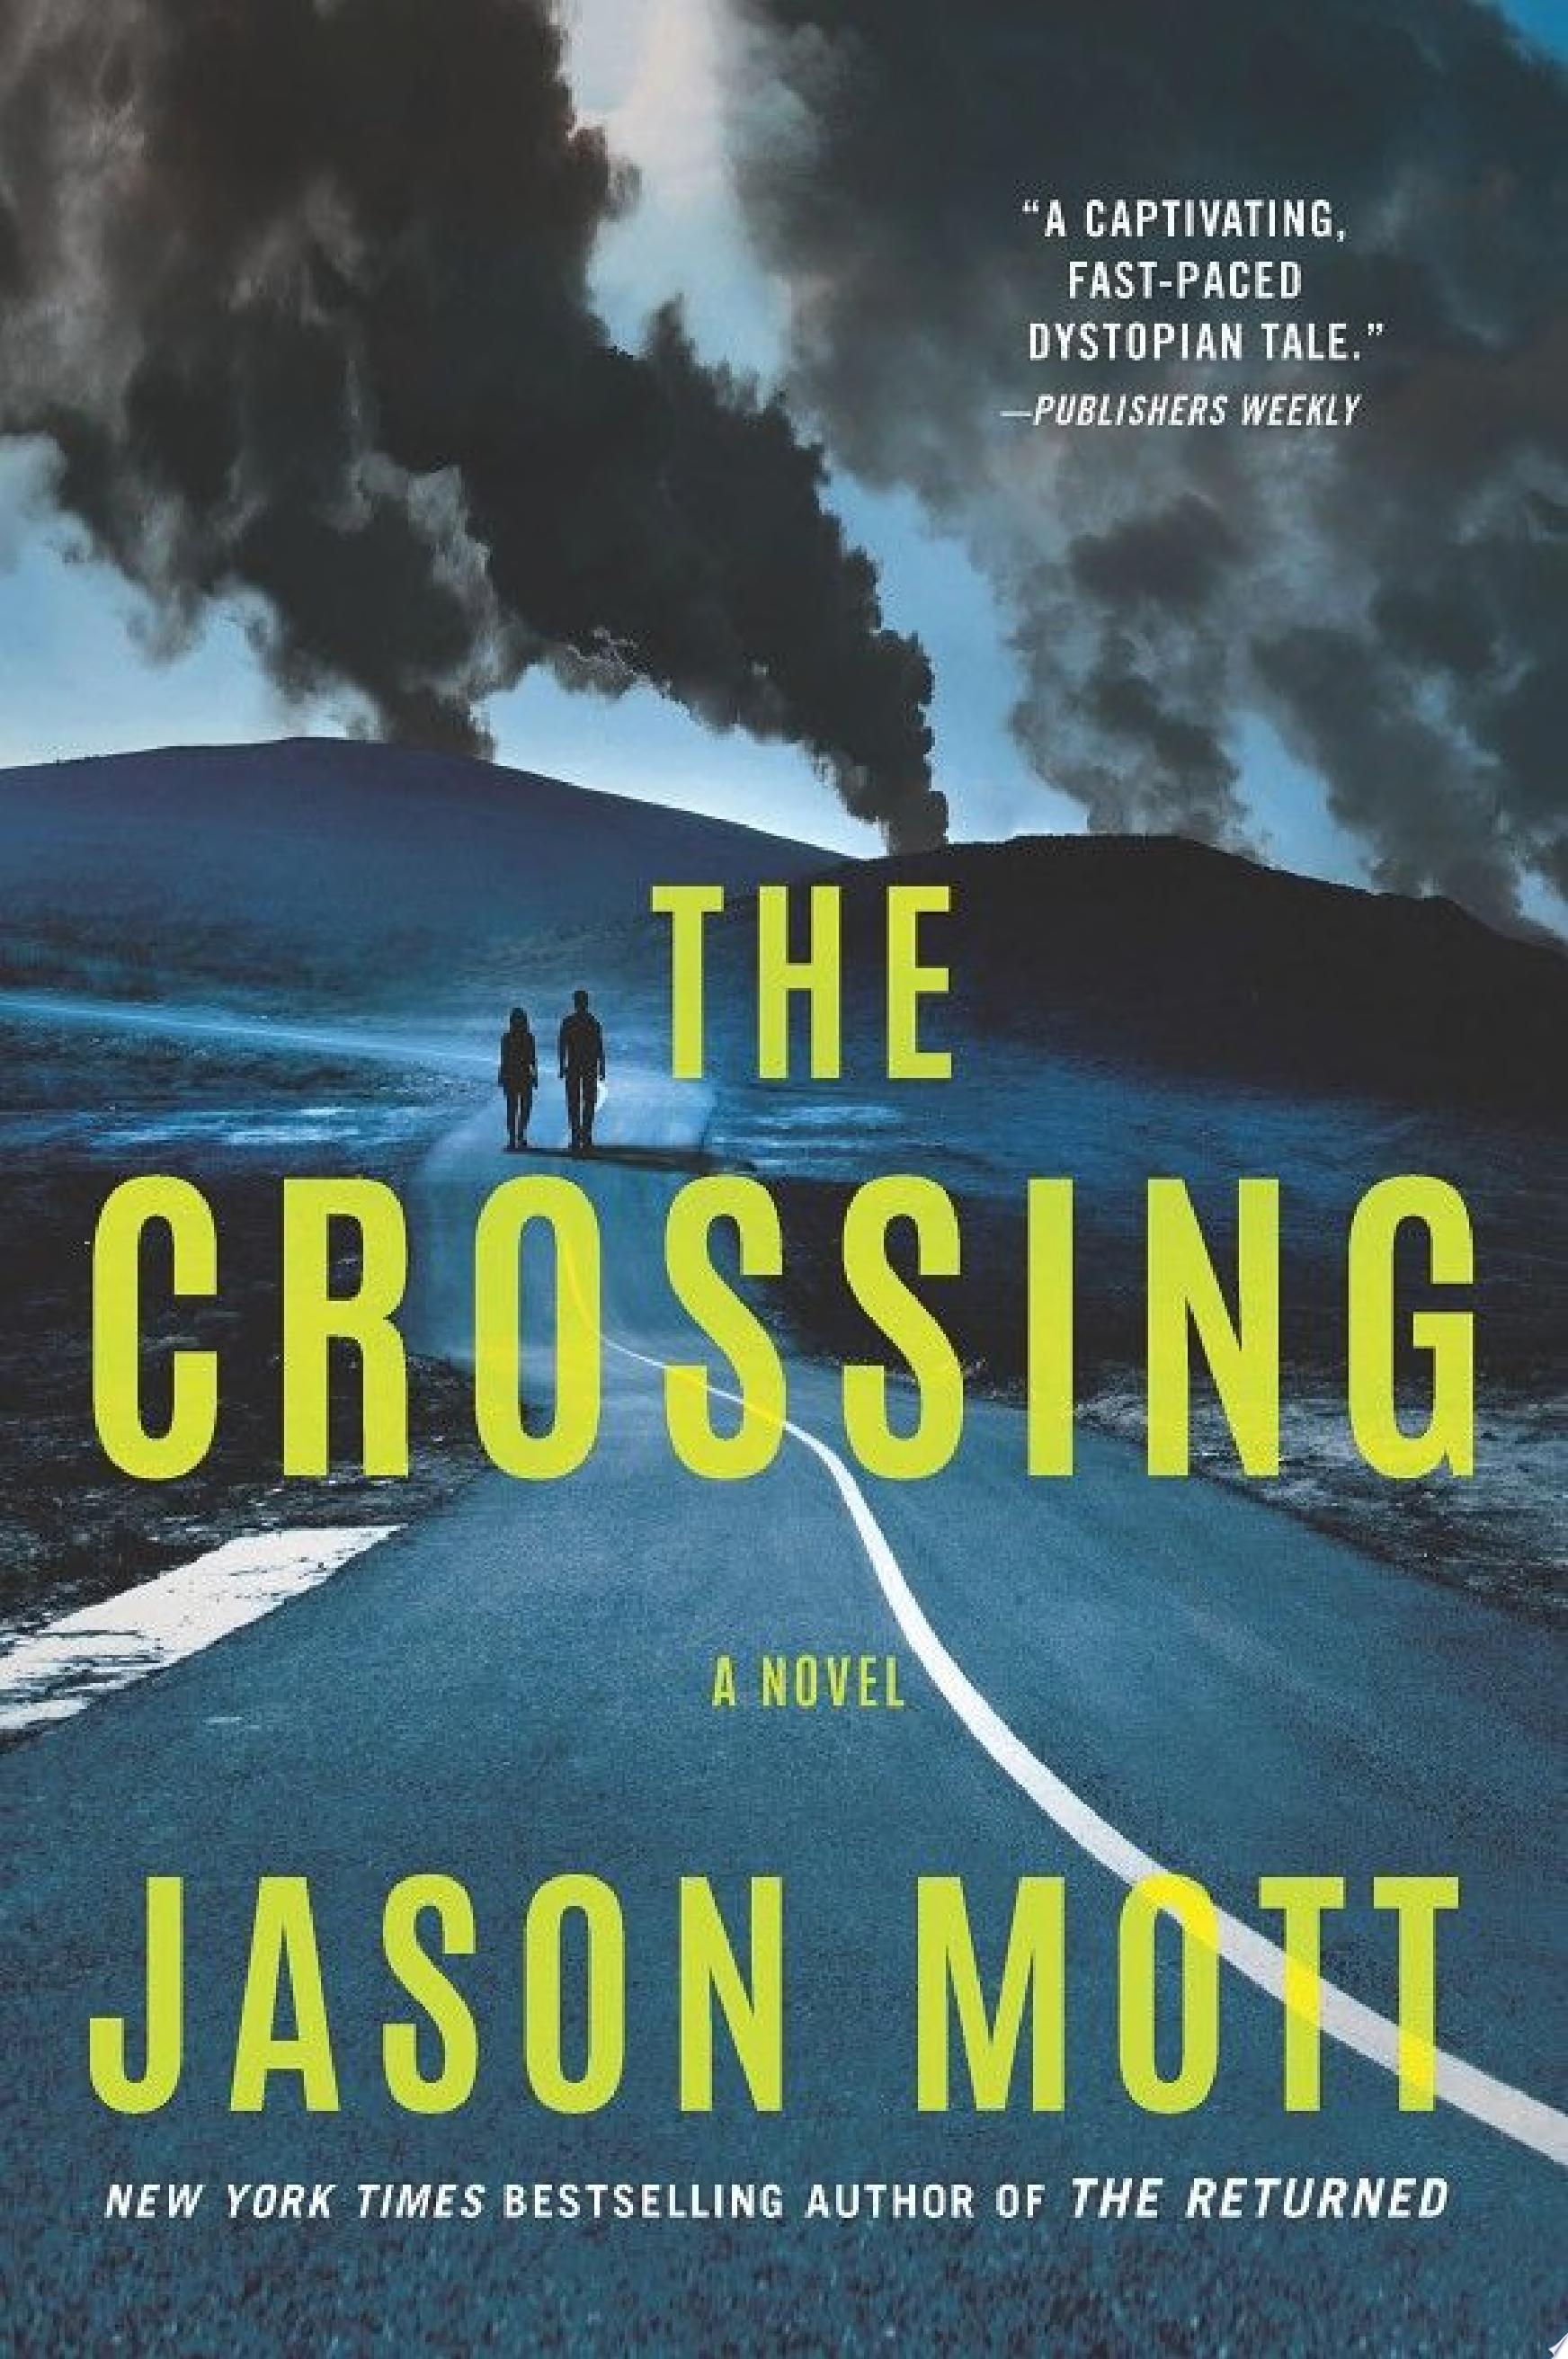 Image for "The Crossing"